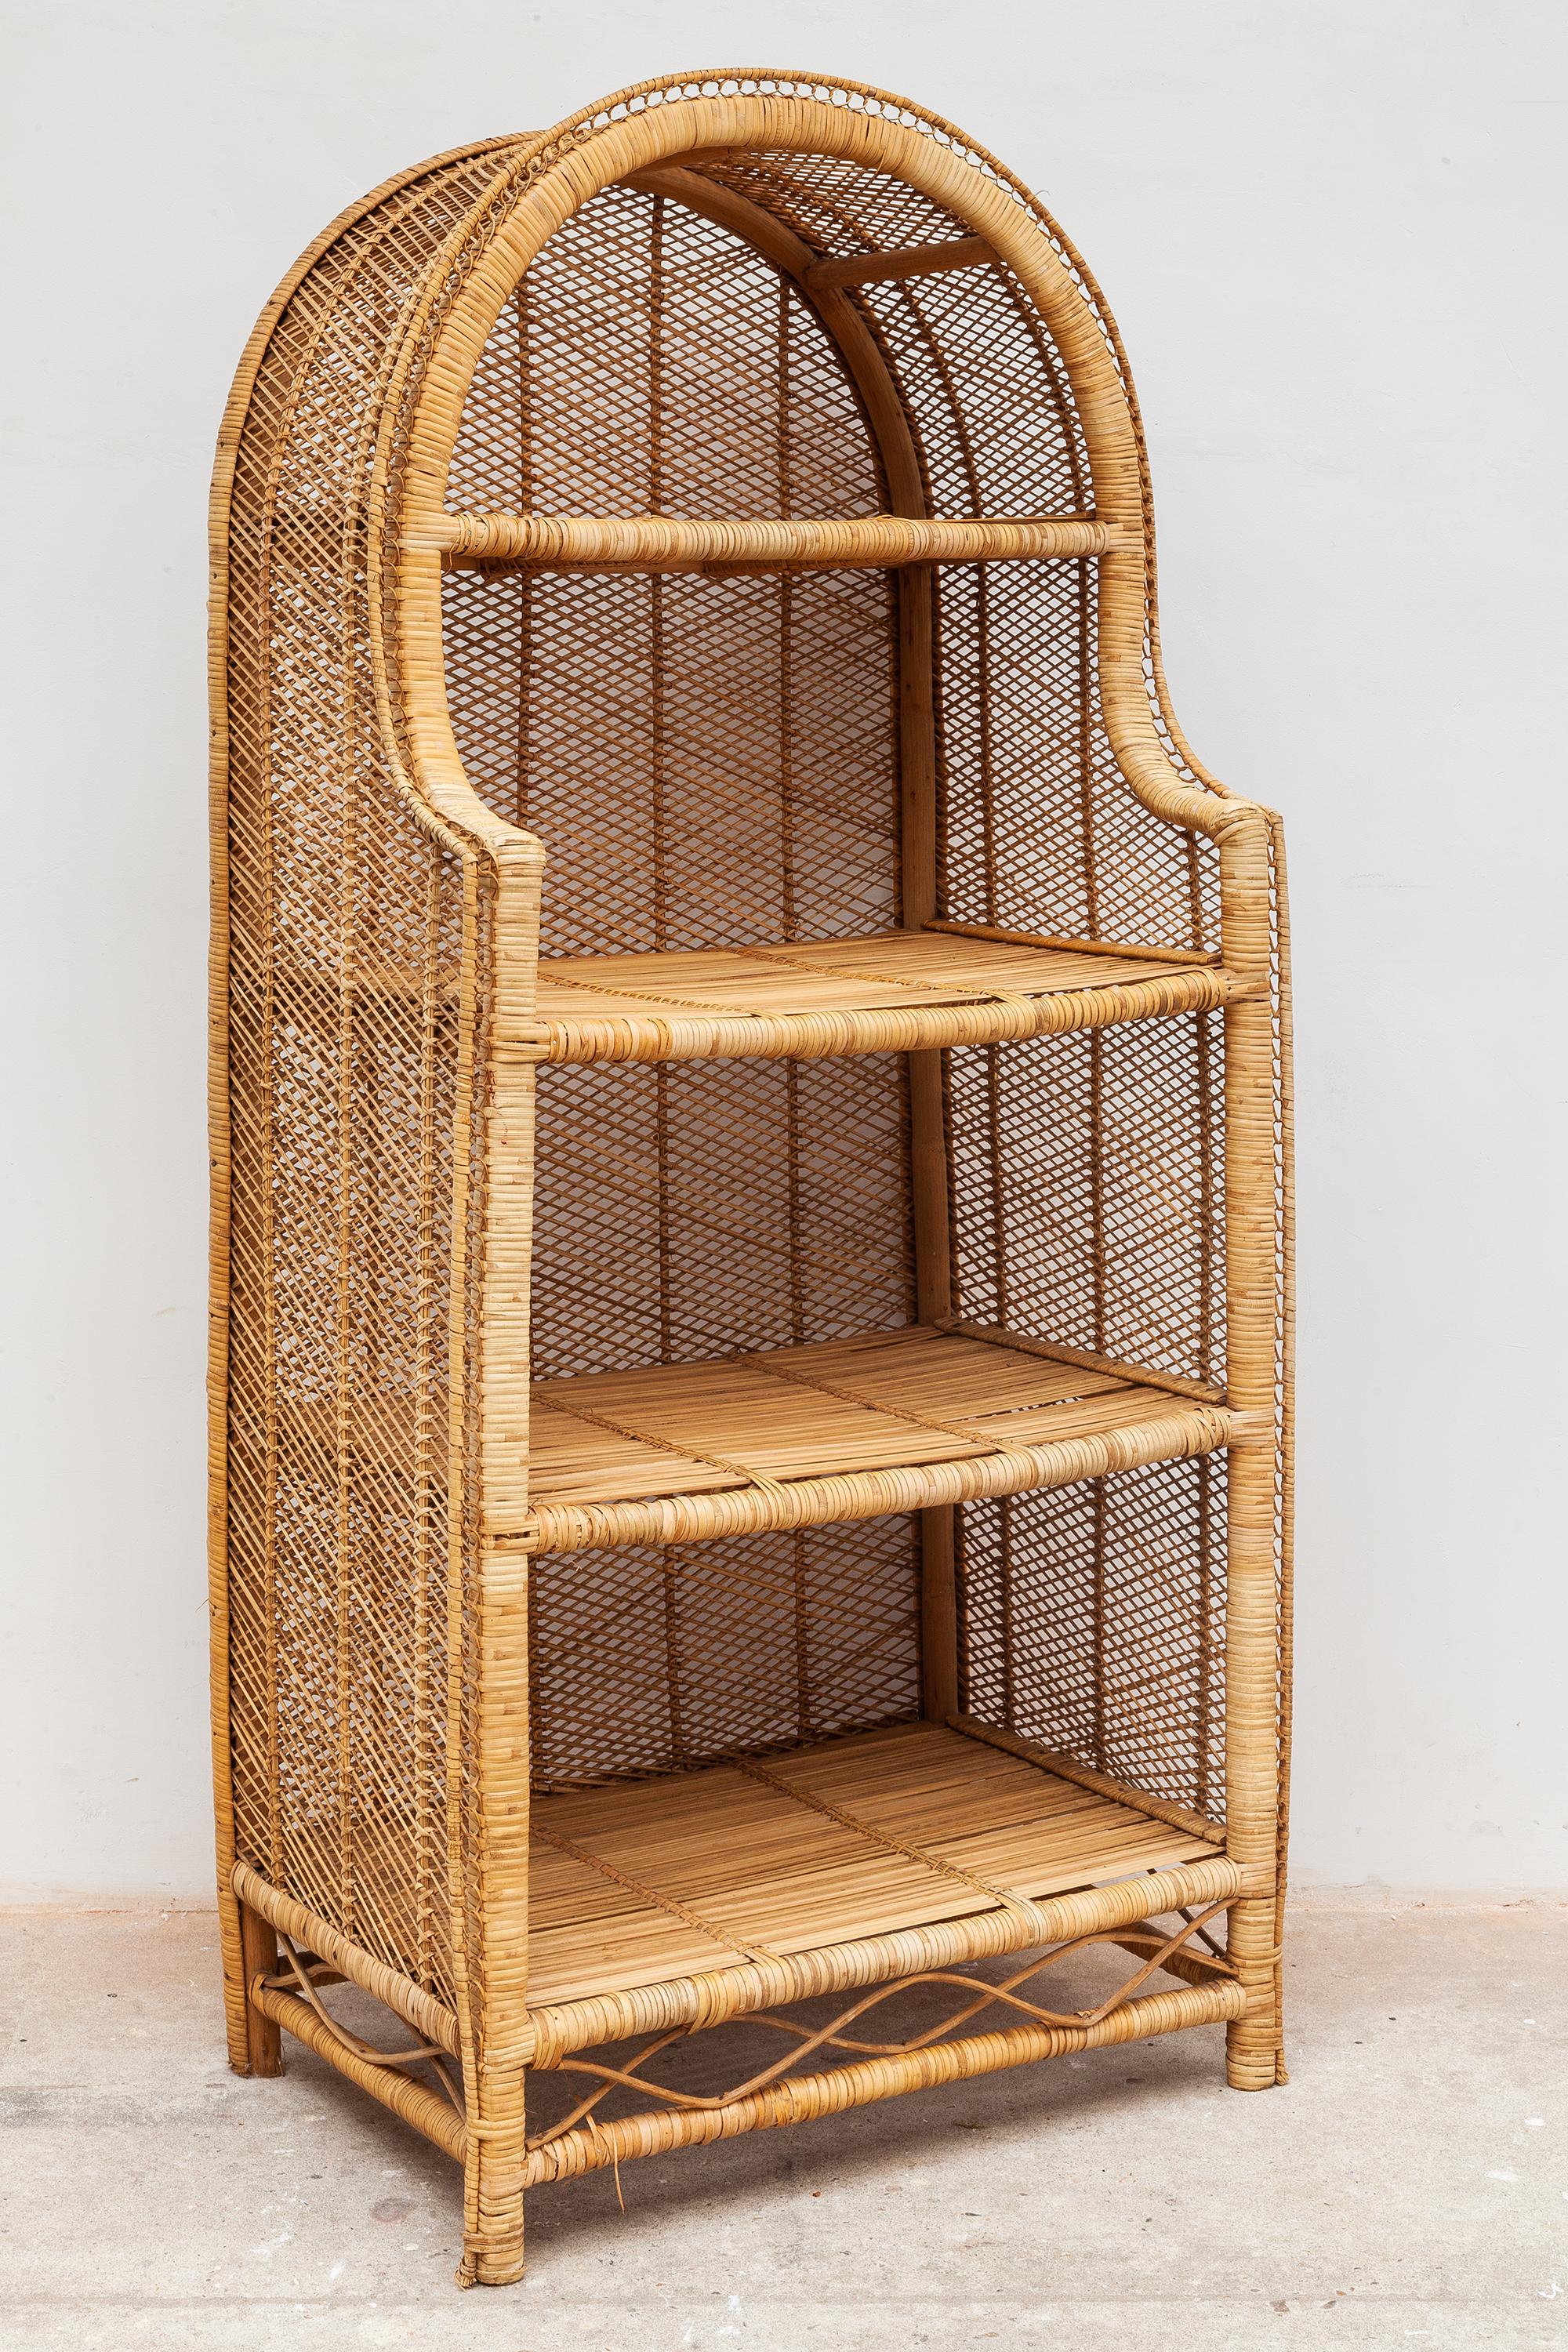 Vintage midcentury rattan shelf. Bamboo arch shaped frame with four shelves. Original model decoration or bookshelf perfect for adding some storage where you need in beautifully woven rattan which gives a special tropic accent in your